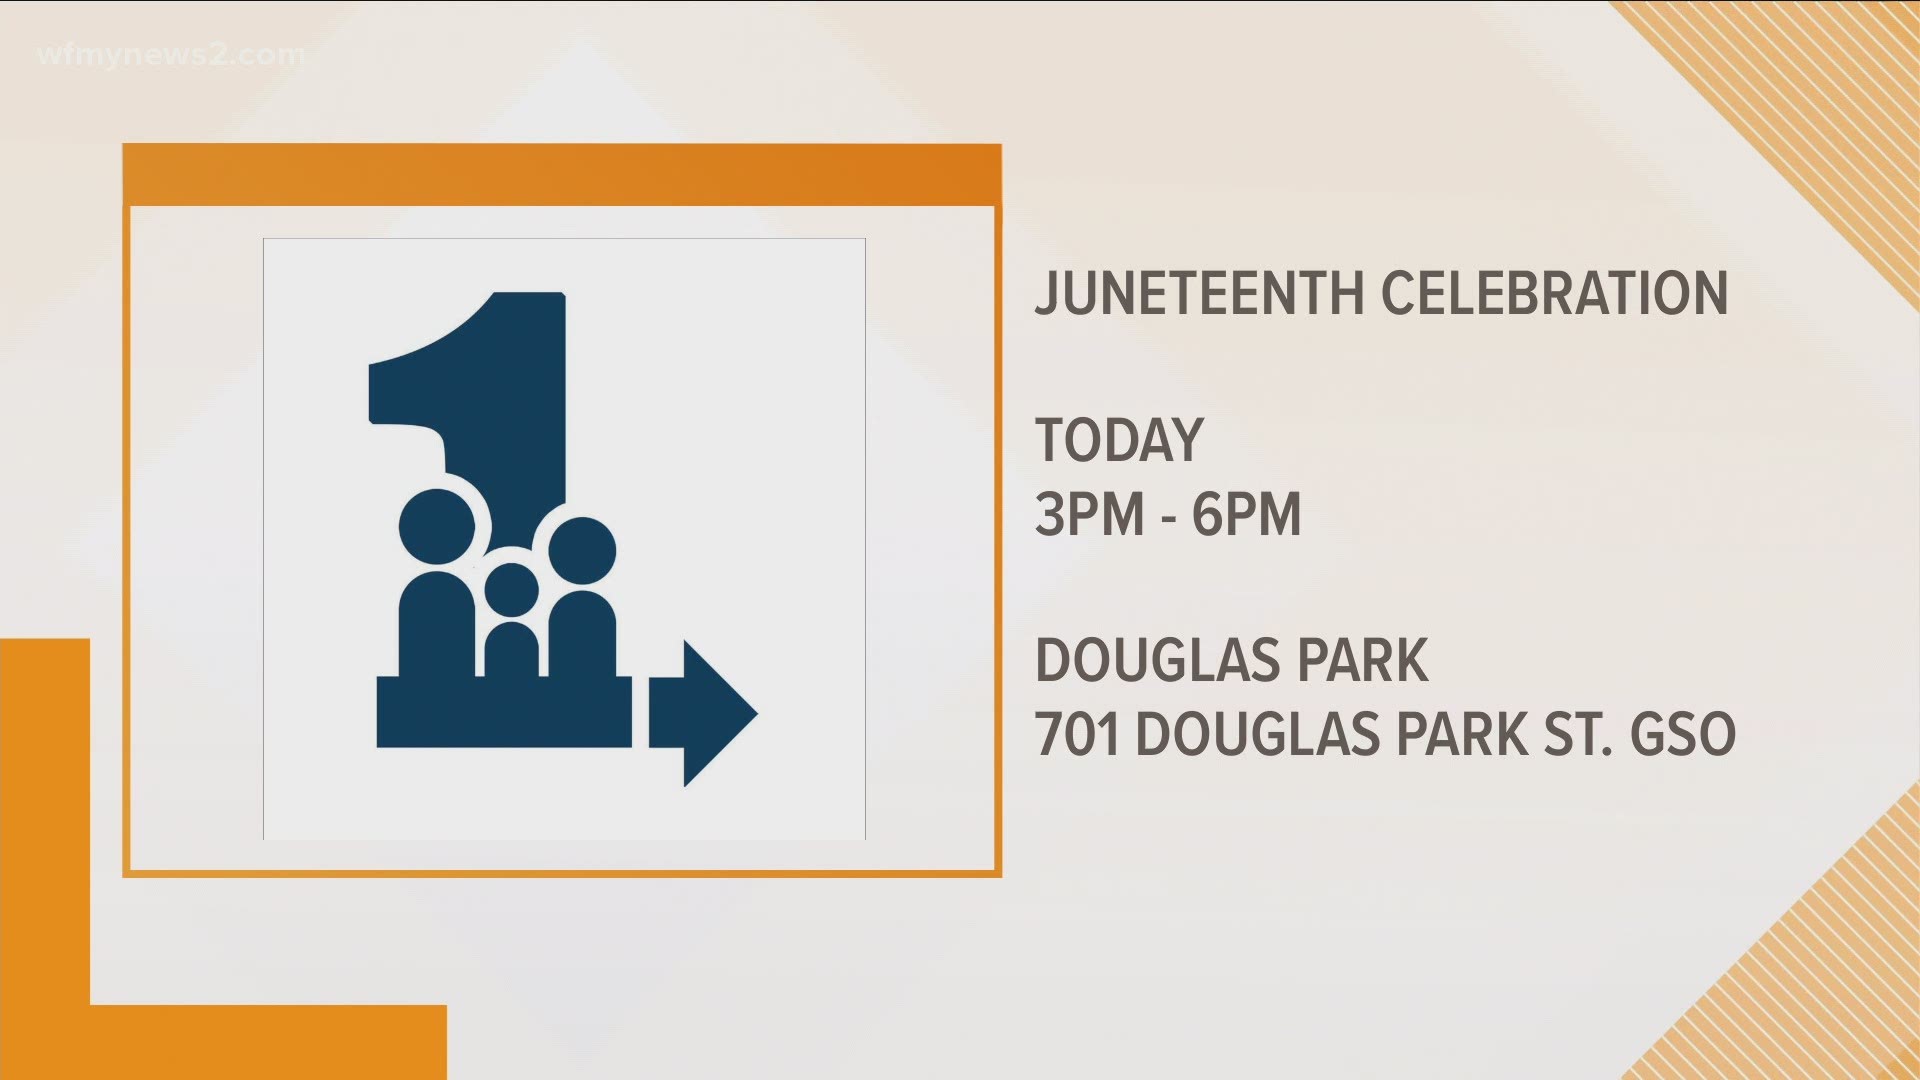 The City of Greensboro will be holding a virtual Juneteenth celebration on Facebook today from 9:00 a.m. to 7:45 p.m.